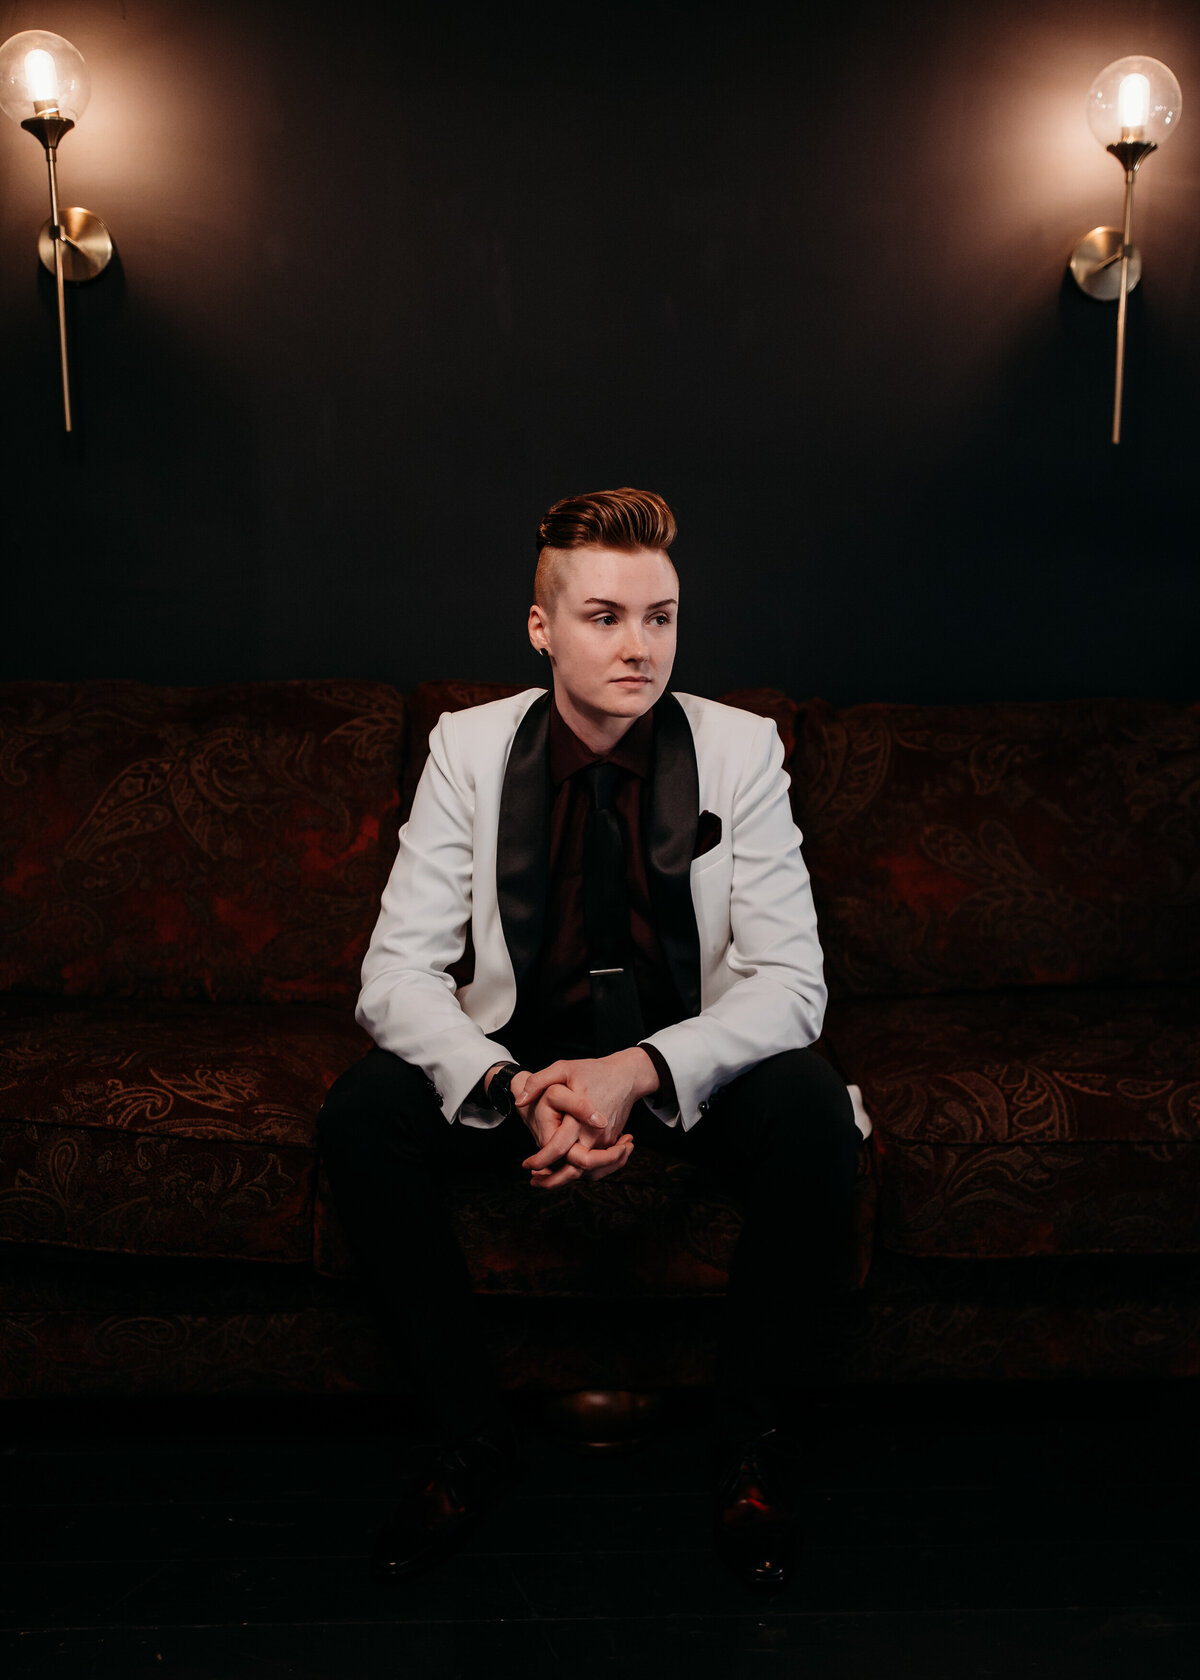 Person seated on a vintage couch in a stylish white jacket with black lapels